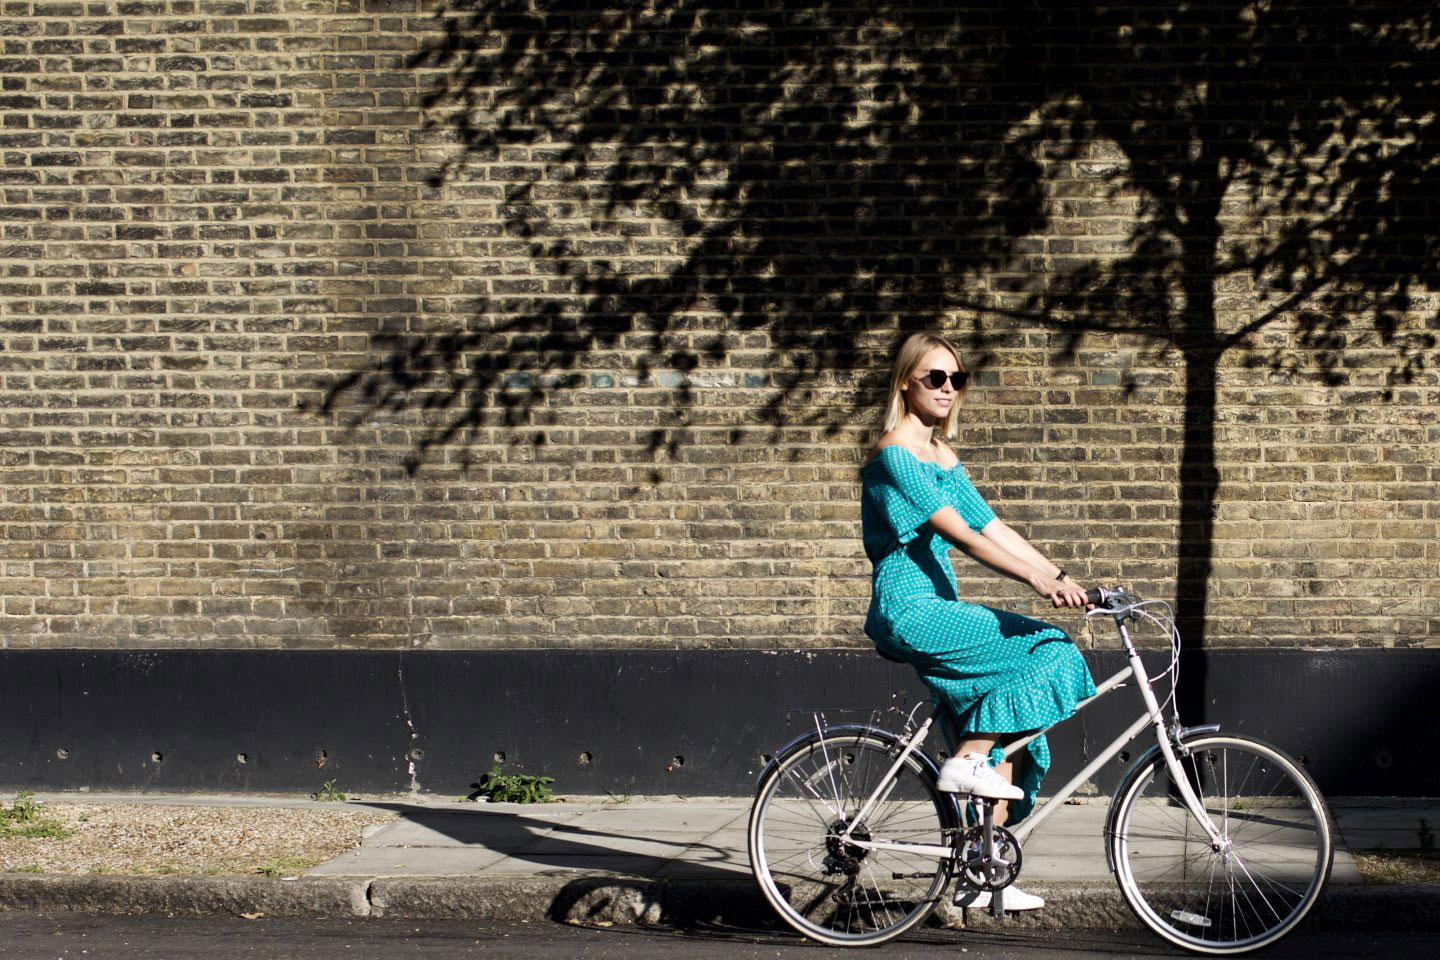 Velondonista: VELO – meaning to bicycle in various languages, LONDON and fashionISTA. Source: Courtesy of Janna Brom